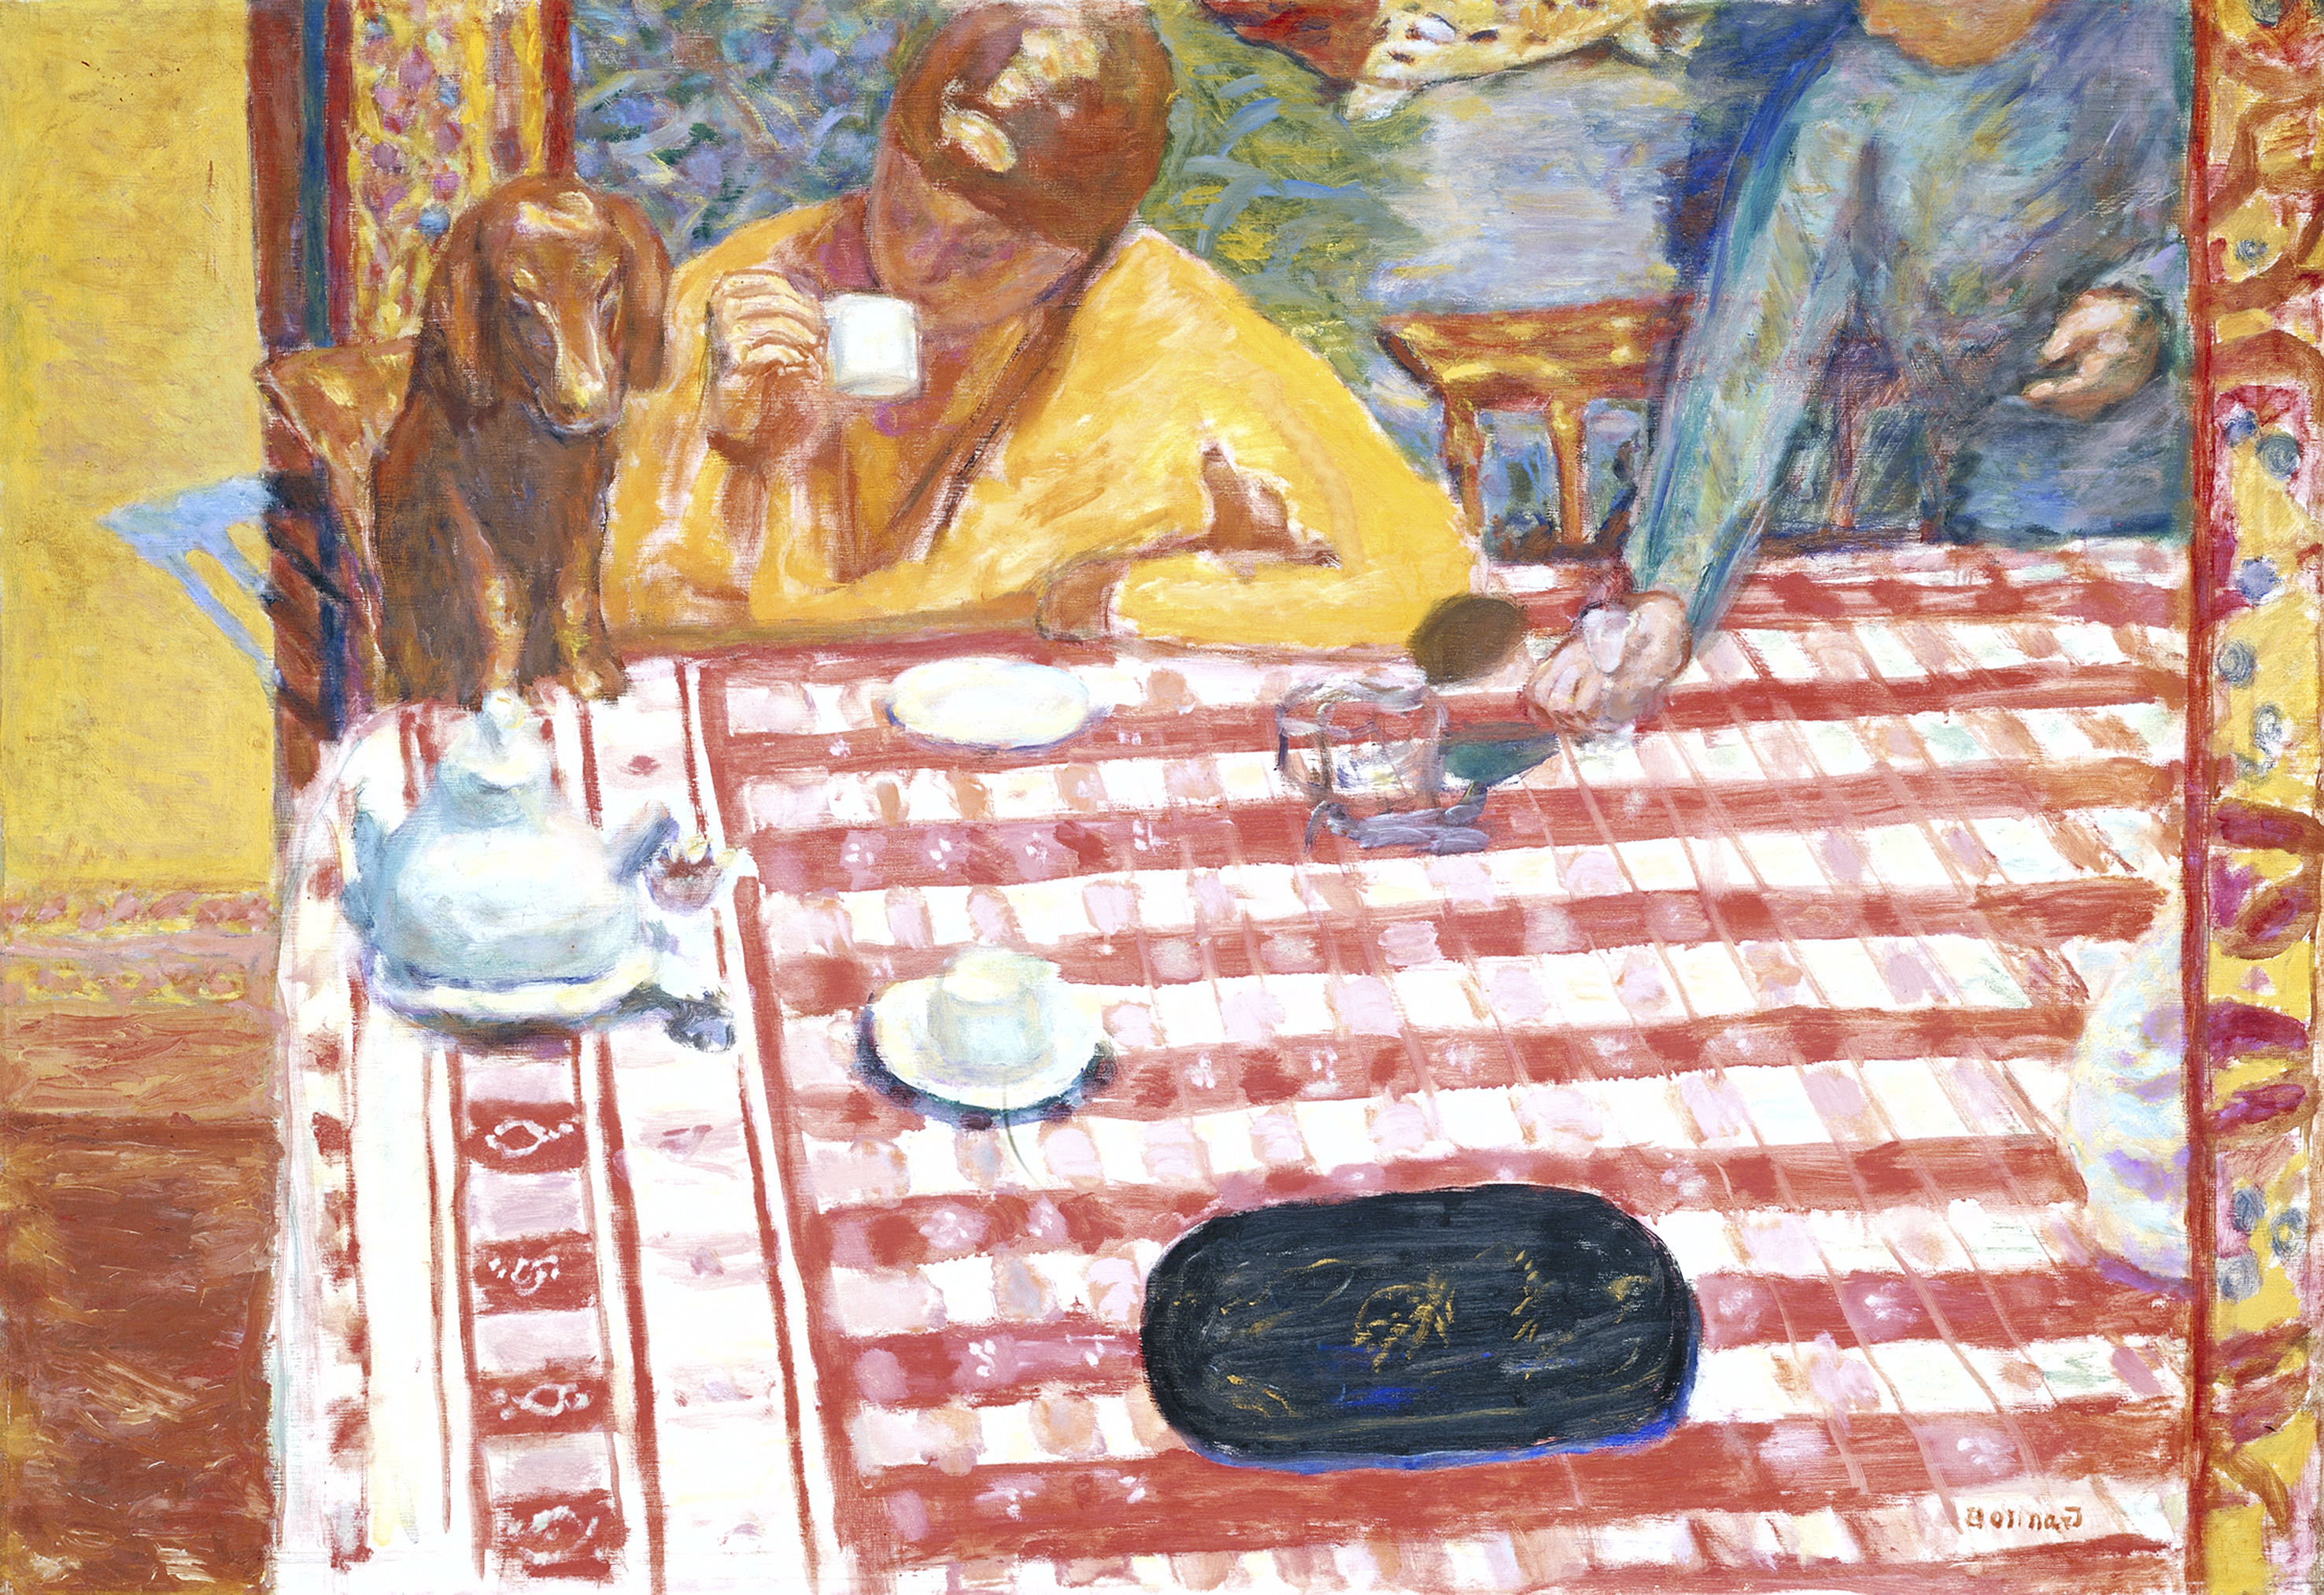 Oil painting showing a woman sitting at a table drinking coffee, with a dachshund beside her.